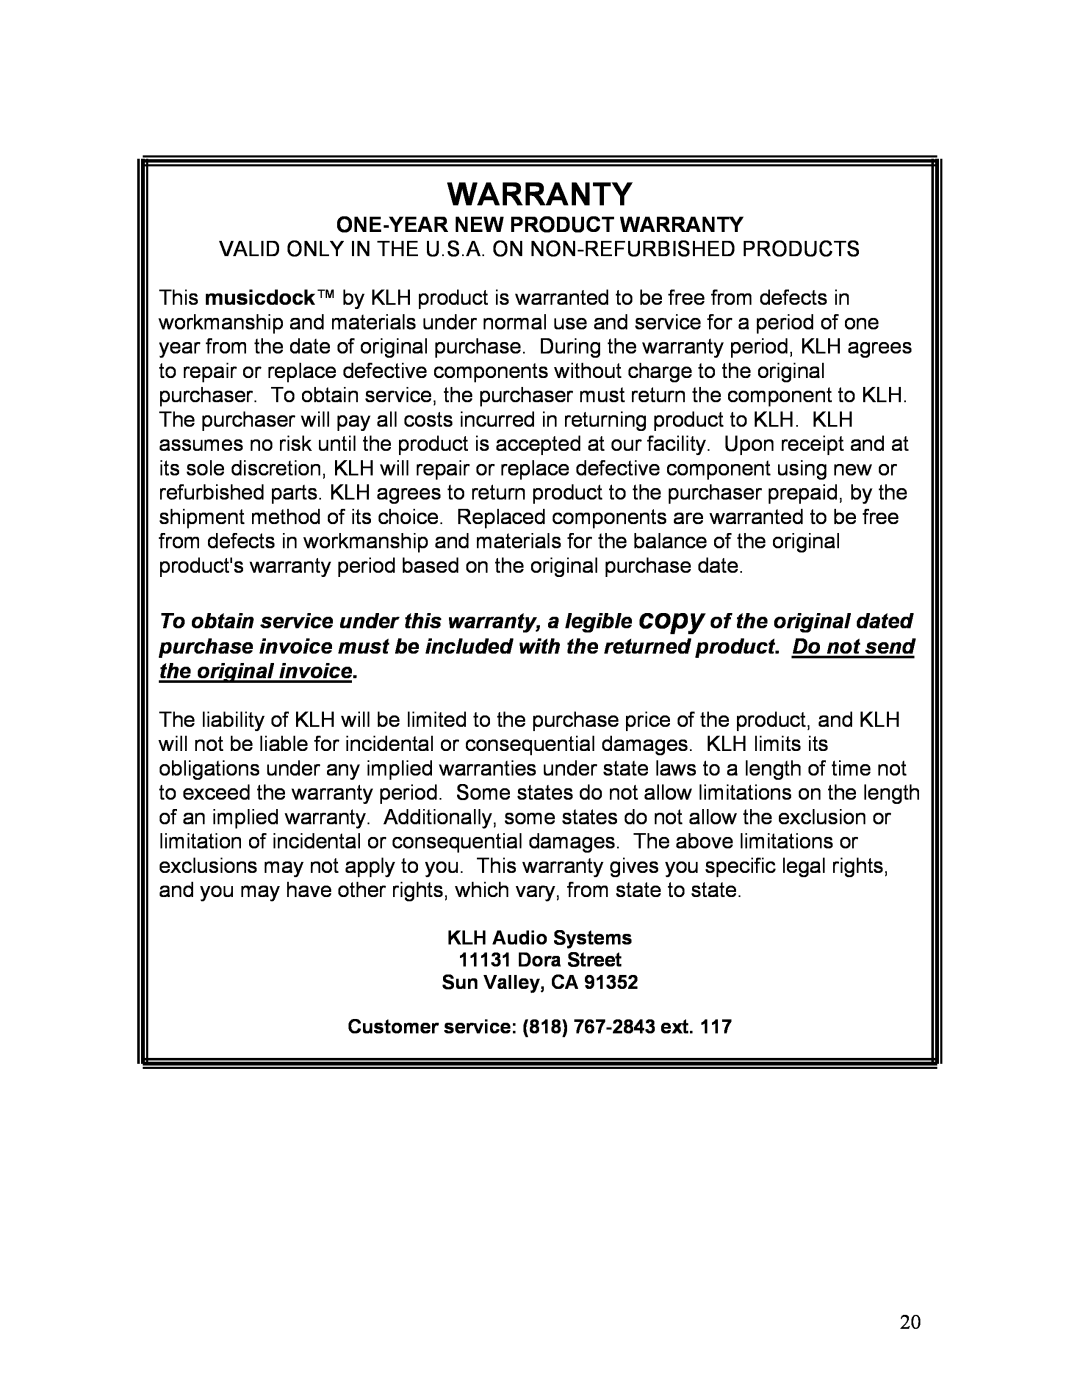 KLH KS-600 owner manual One-Yearnew Product Warranty 